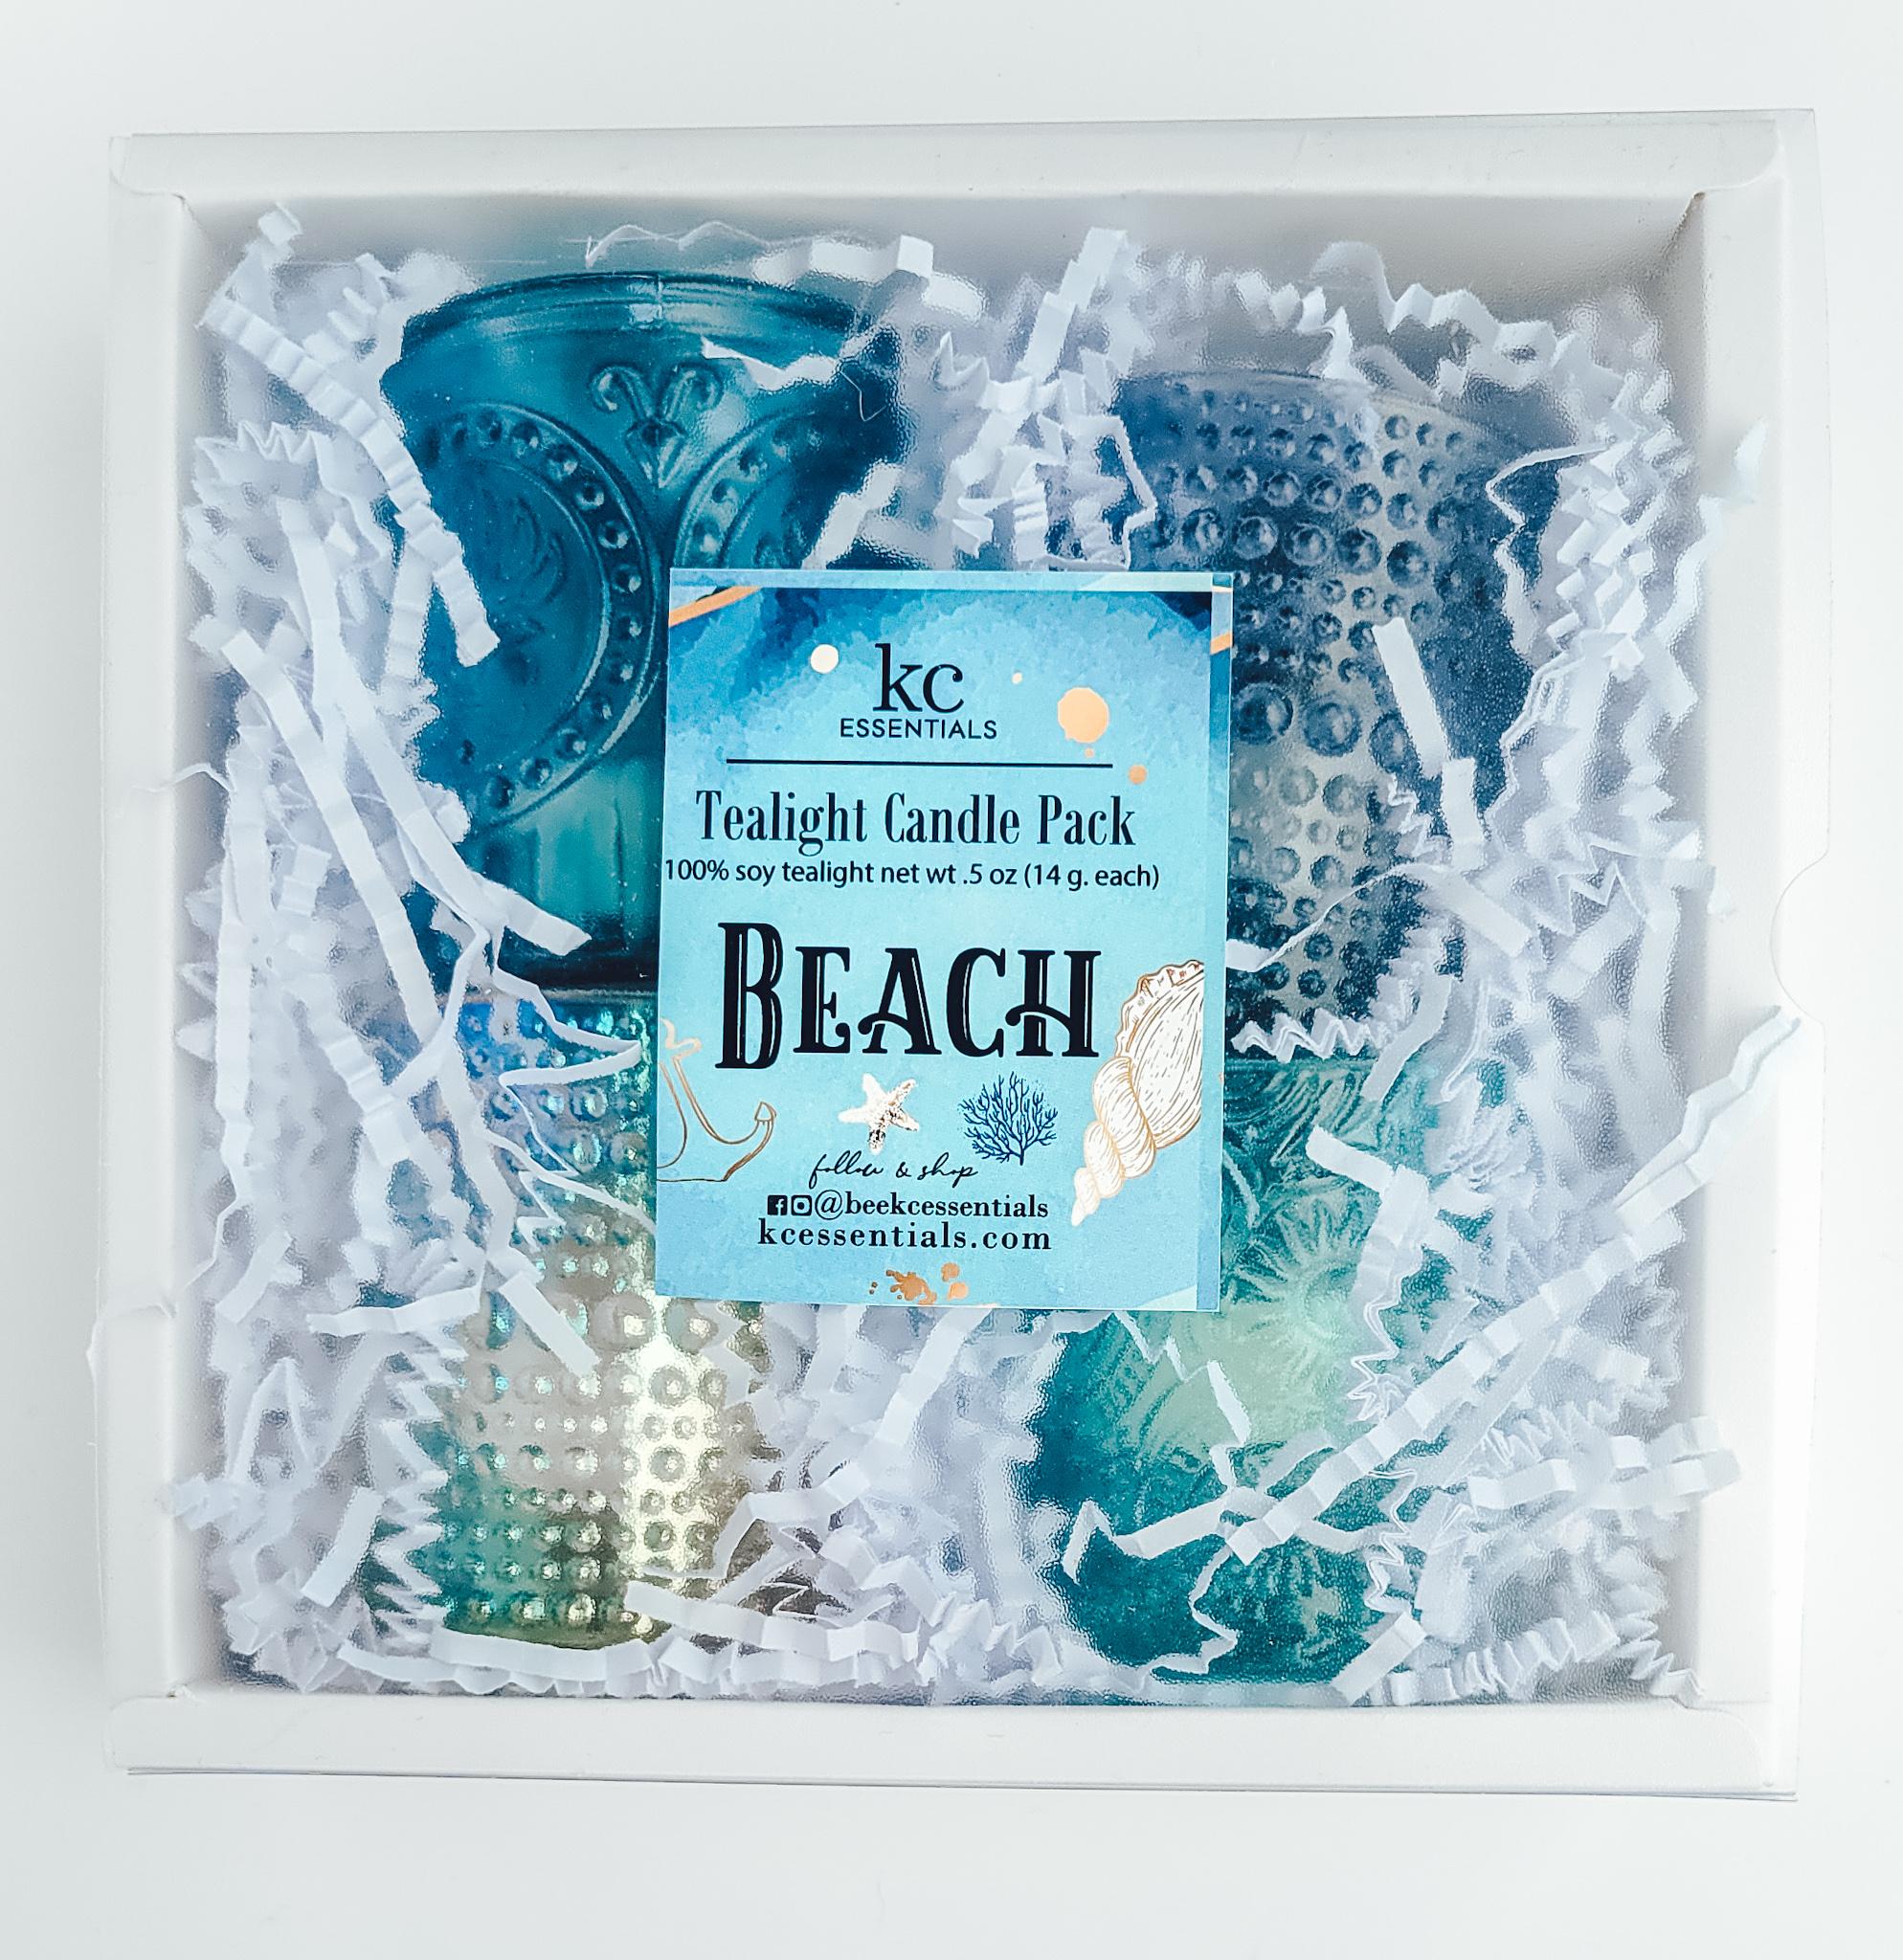 The Beach Tealight Candle Variety Pack is the best way to try many scents at once. Includes a variety of coastal scents.